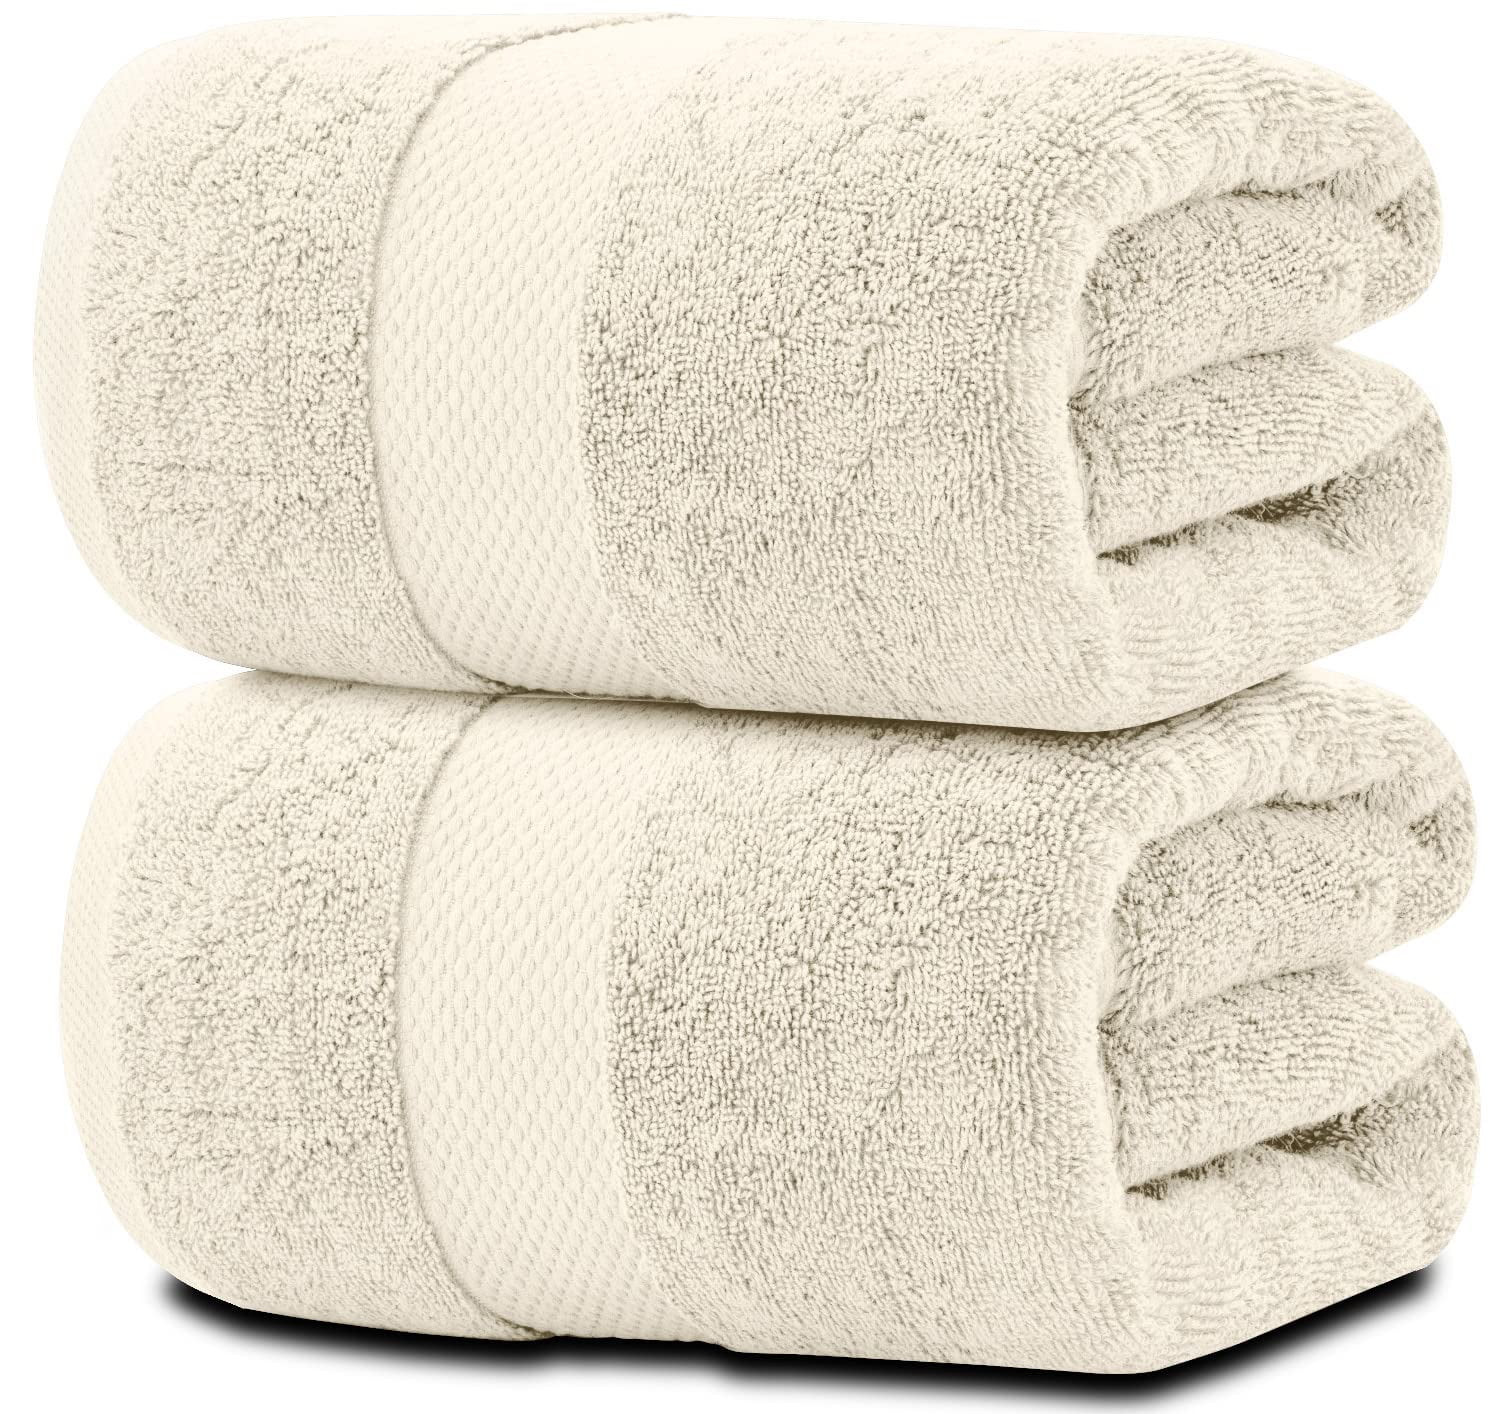 Infinitee Xclusives Premium White Bath Sheets Towels for Adults 2 Pack  Extra Large Bath Towels 35x70-100% Soft Cotton, Absorbent Oversized Towels,  Hotel & Spa Quality Towel Bath Sheets Brilliant White